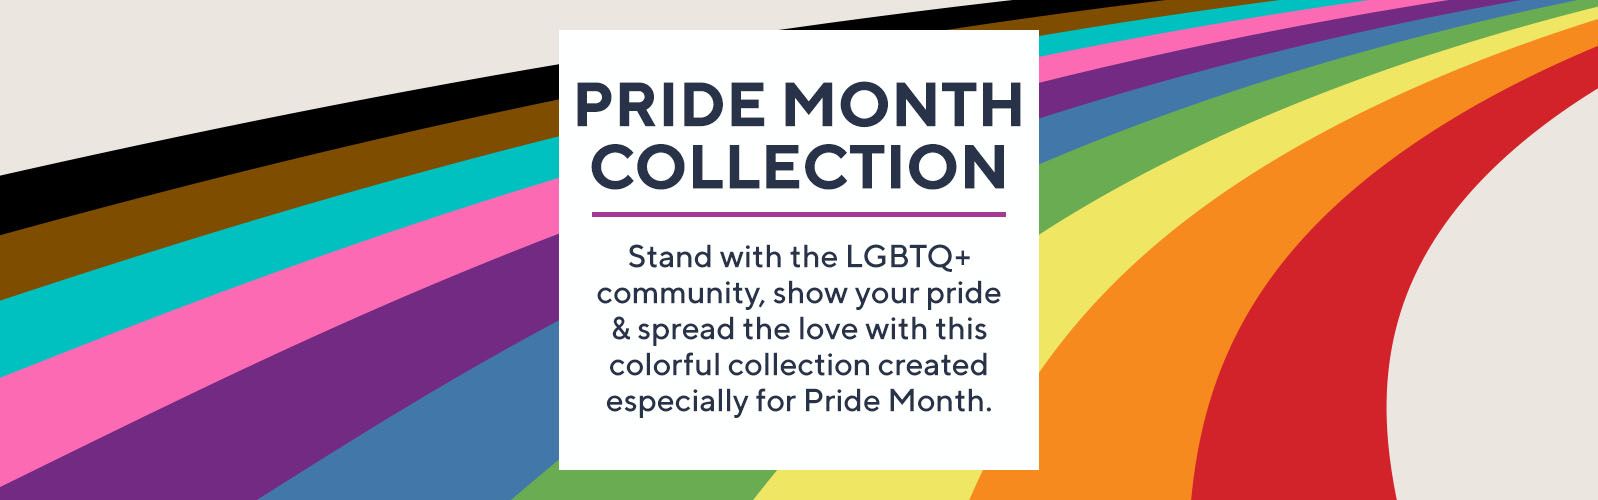 Pride Month Collection: Stand with the LGBTQ+ community, show your pride & spread the love with this colorful collection created especially for Pride Month.